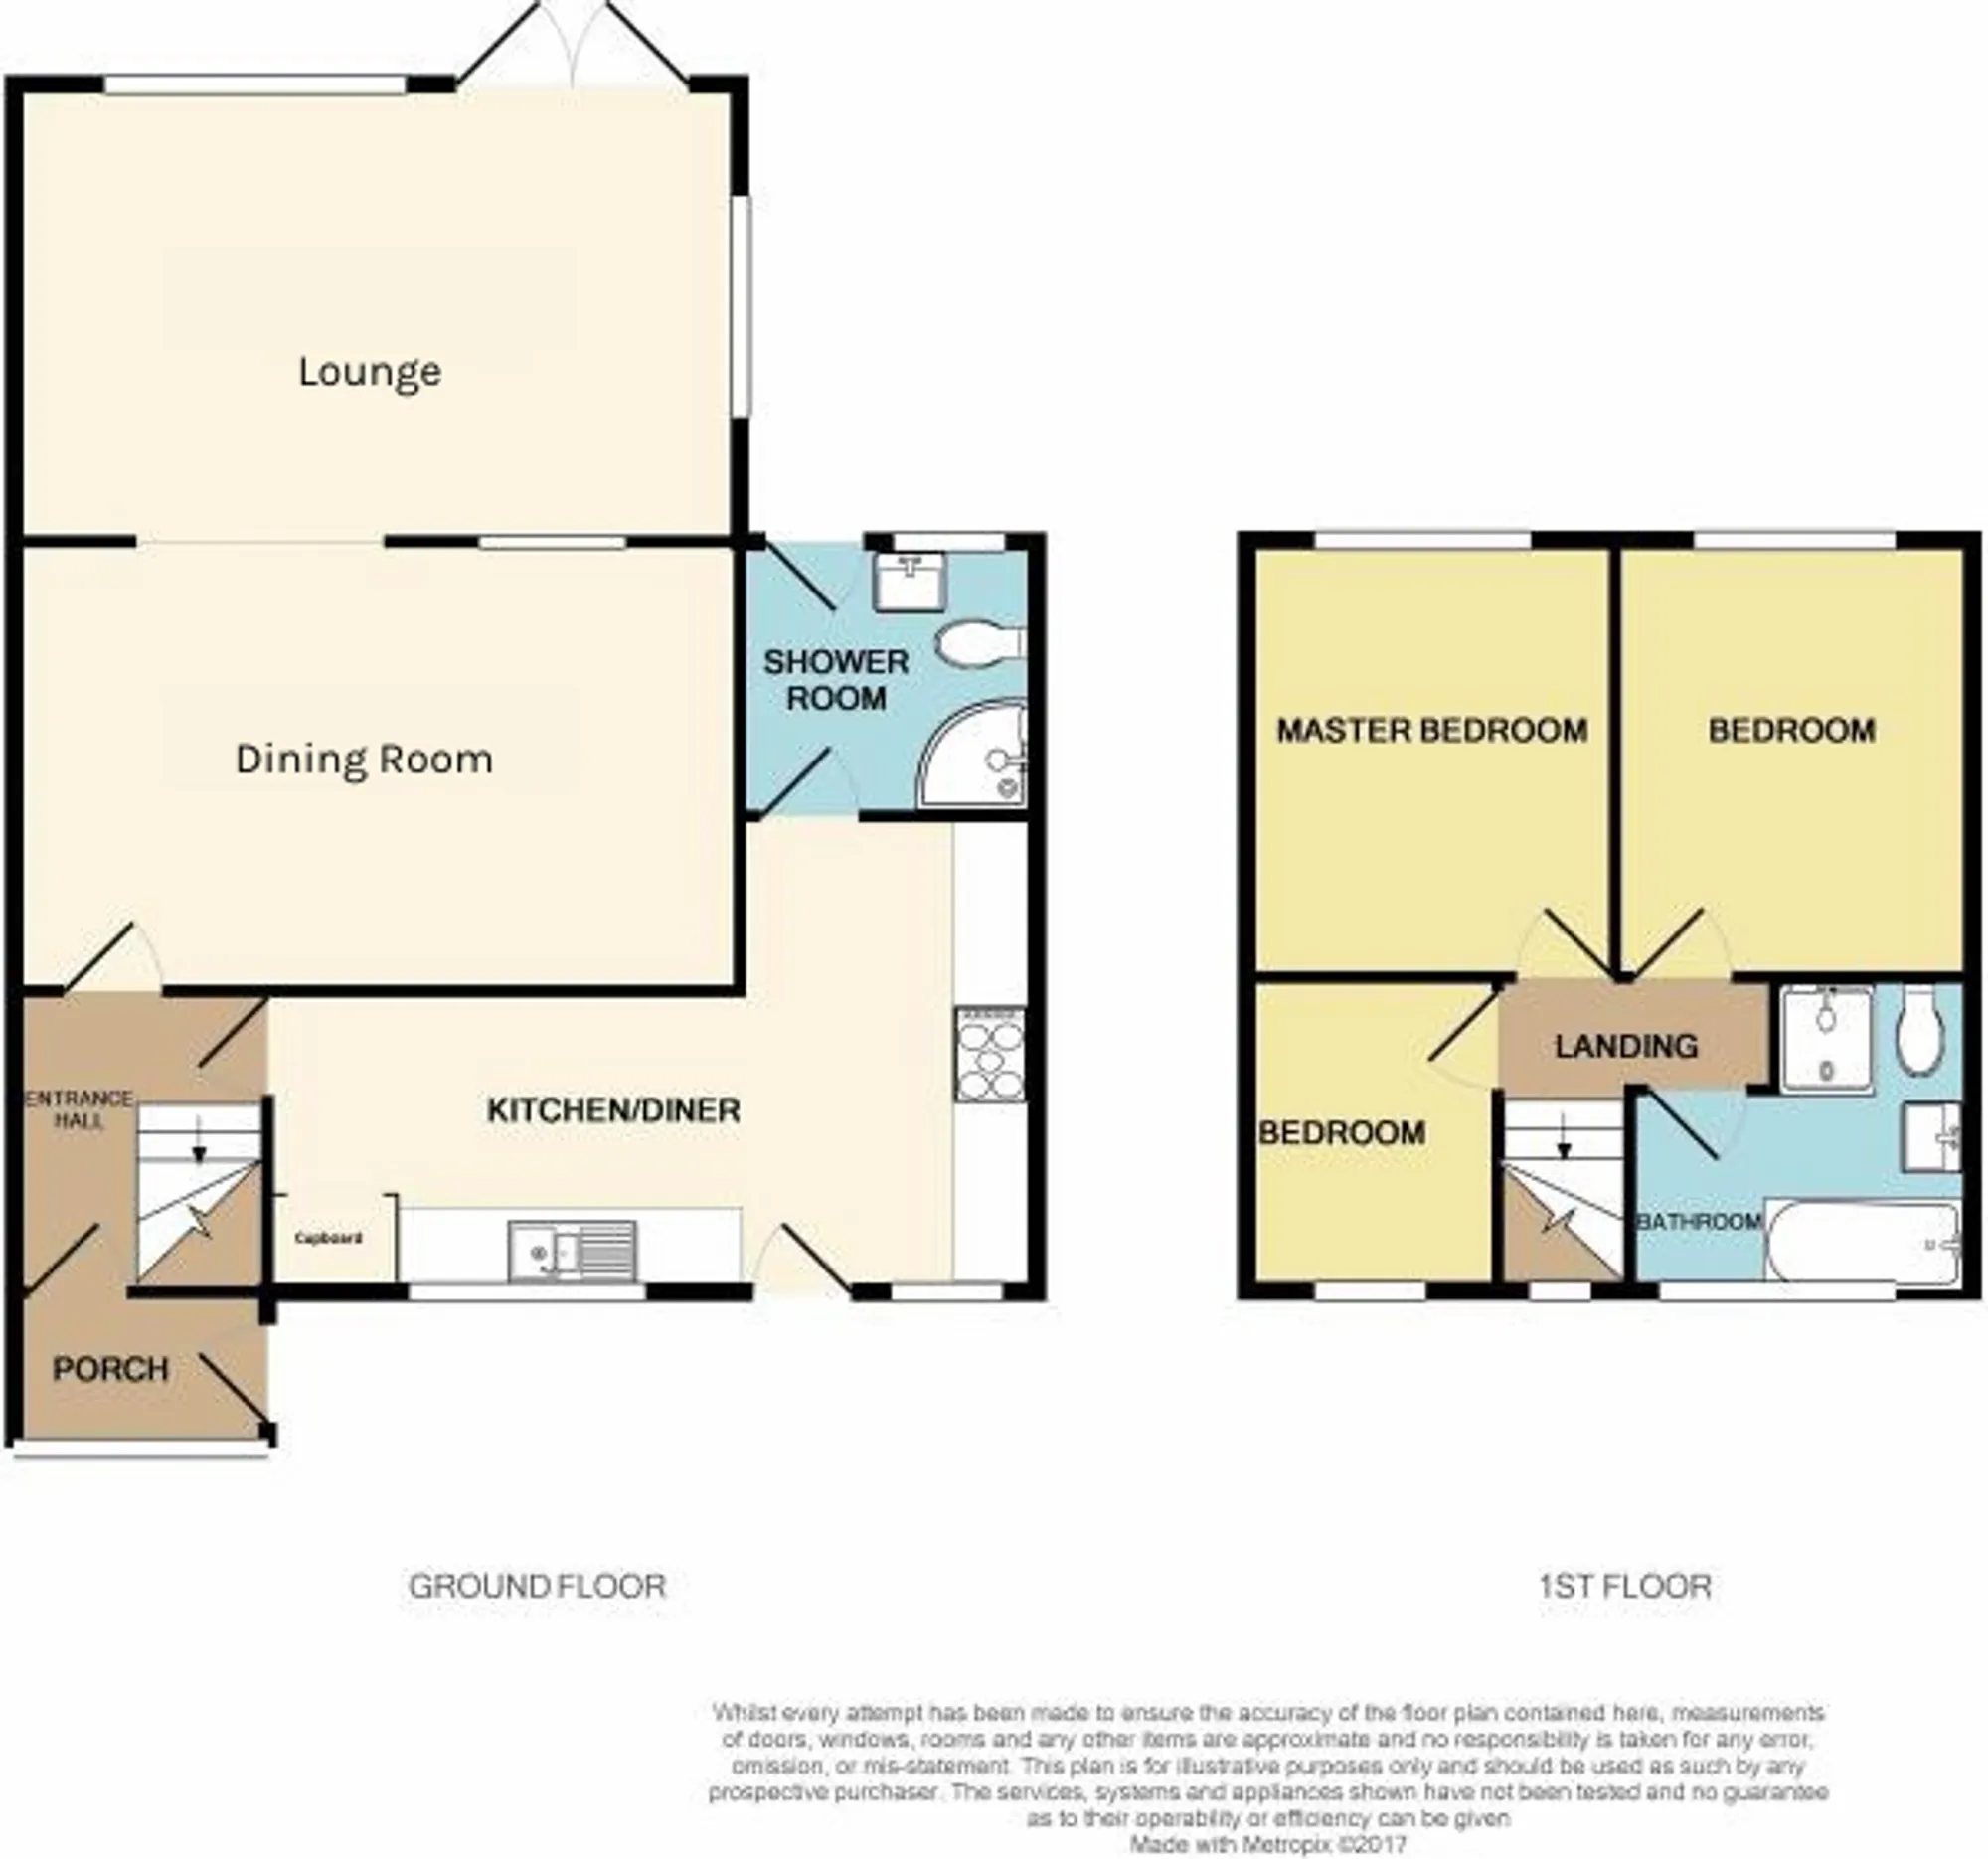 3 bed semi-detached house for sale in Hathaway, Liverpool - Property floorplan